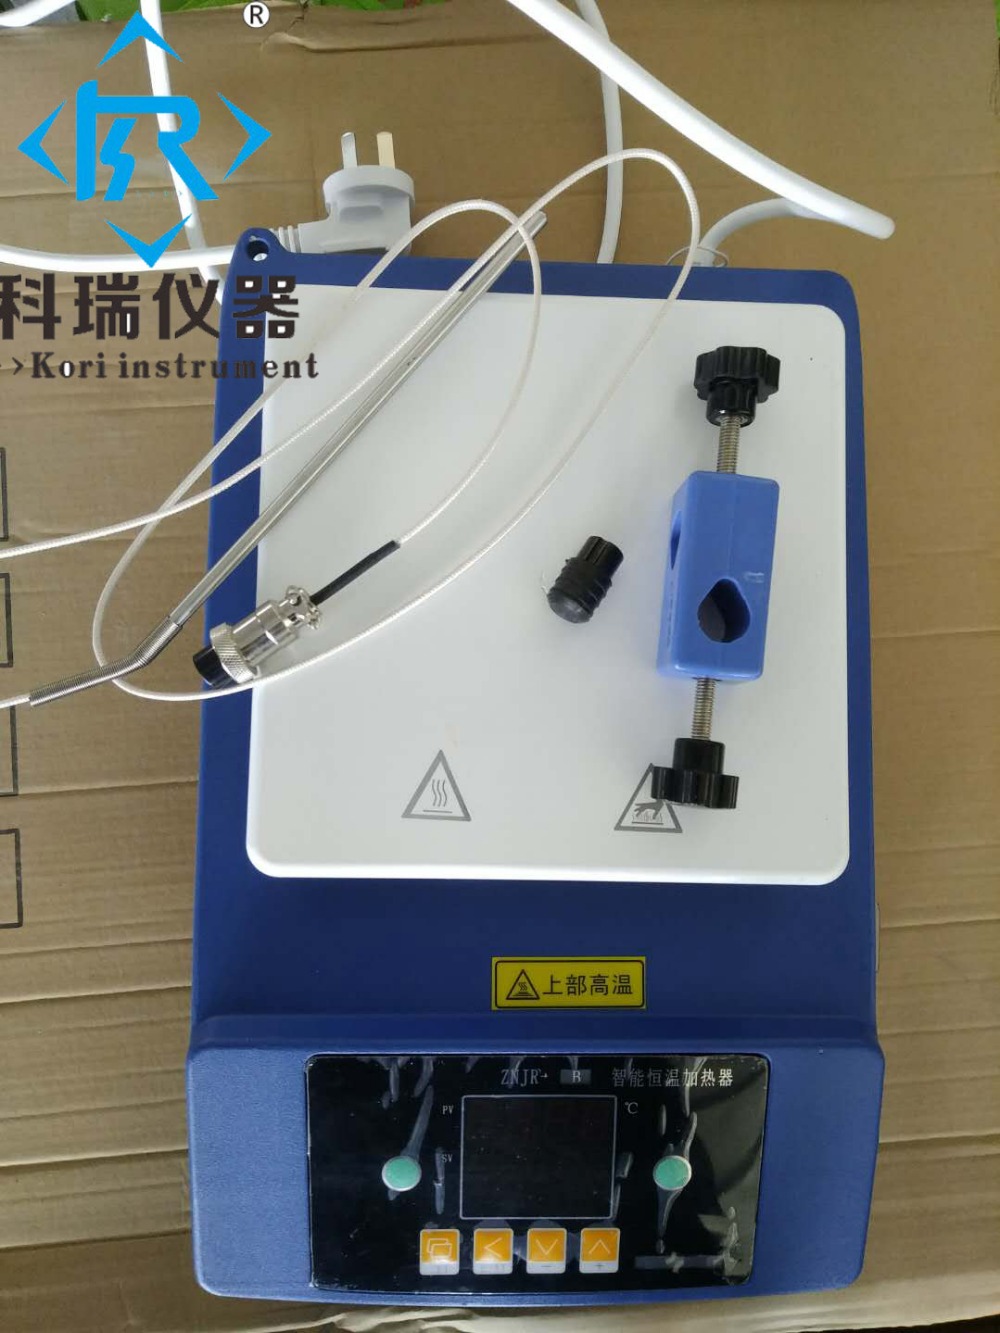 New Style ZNCL-BS Laboratory equipment Heating magnetic stirrer hot plate with mixer (Hot plate size:140X140mm)with Waterproof